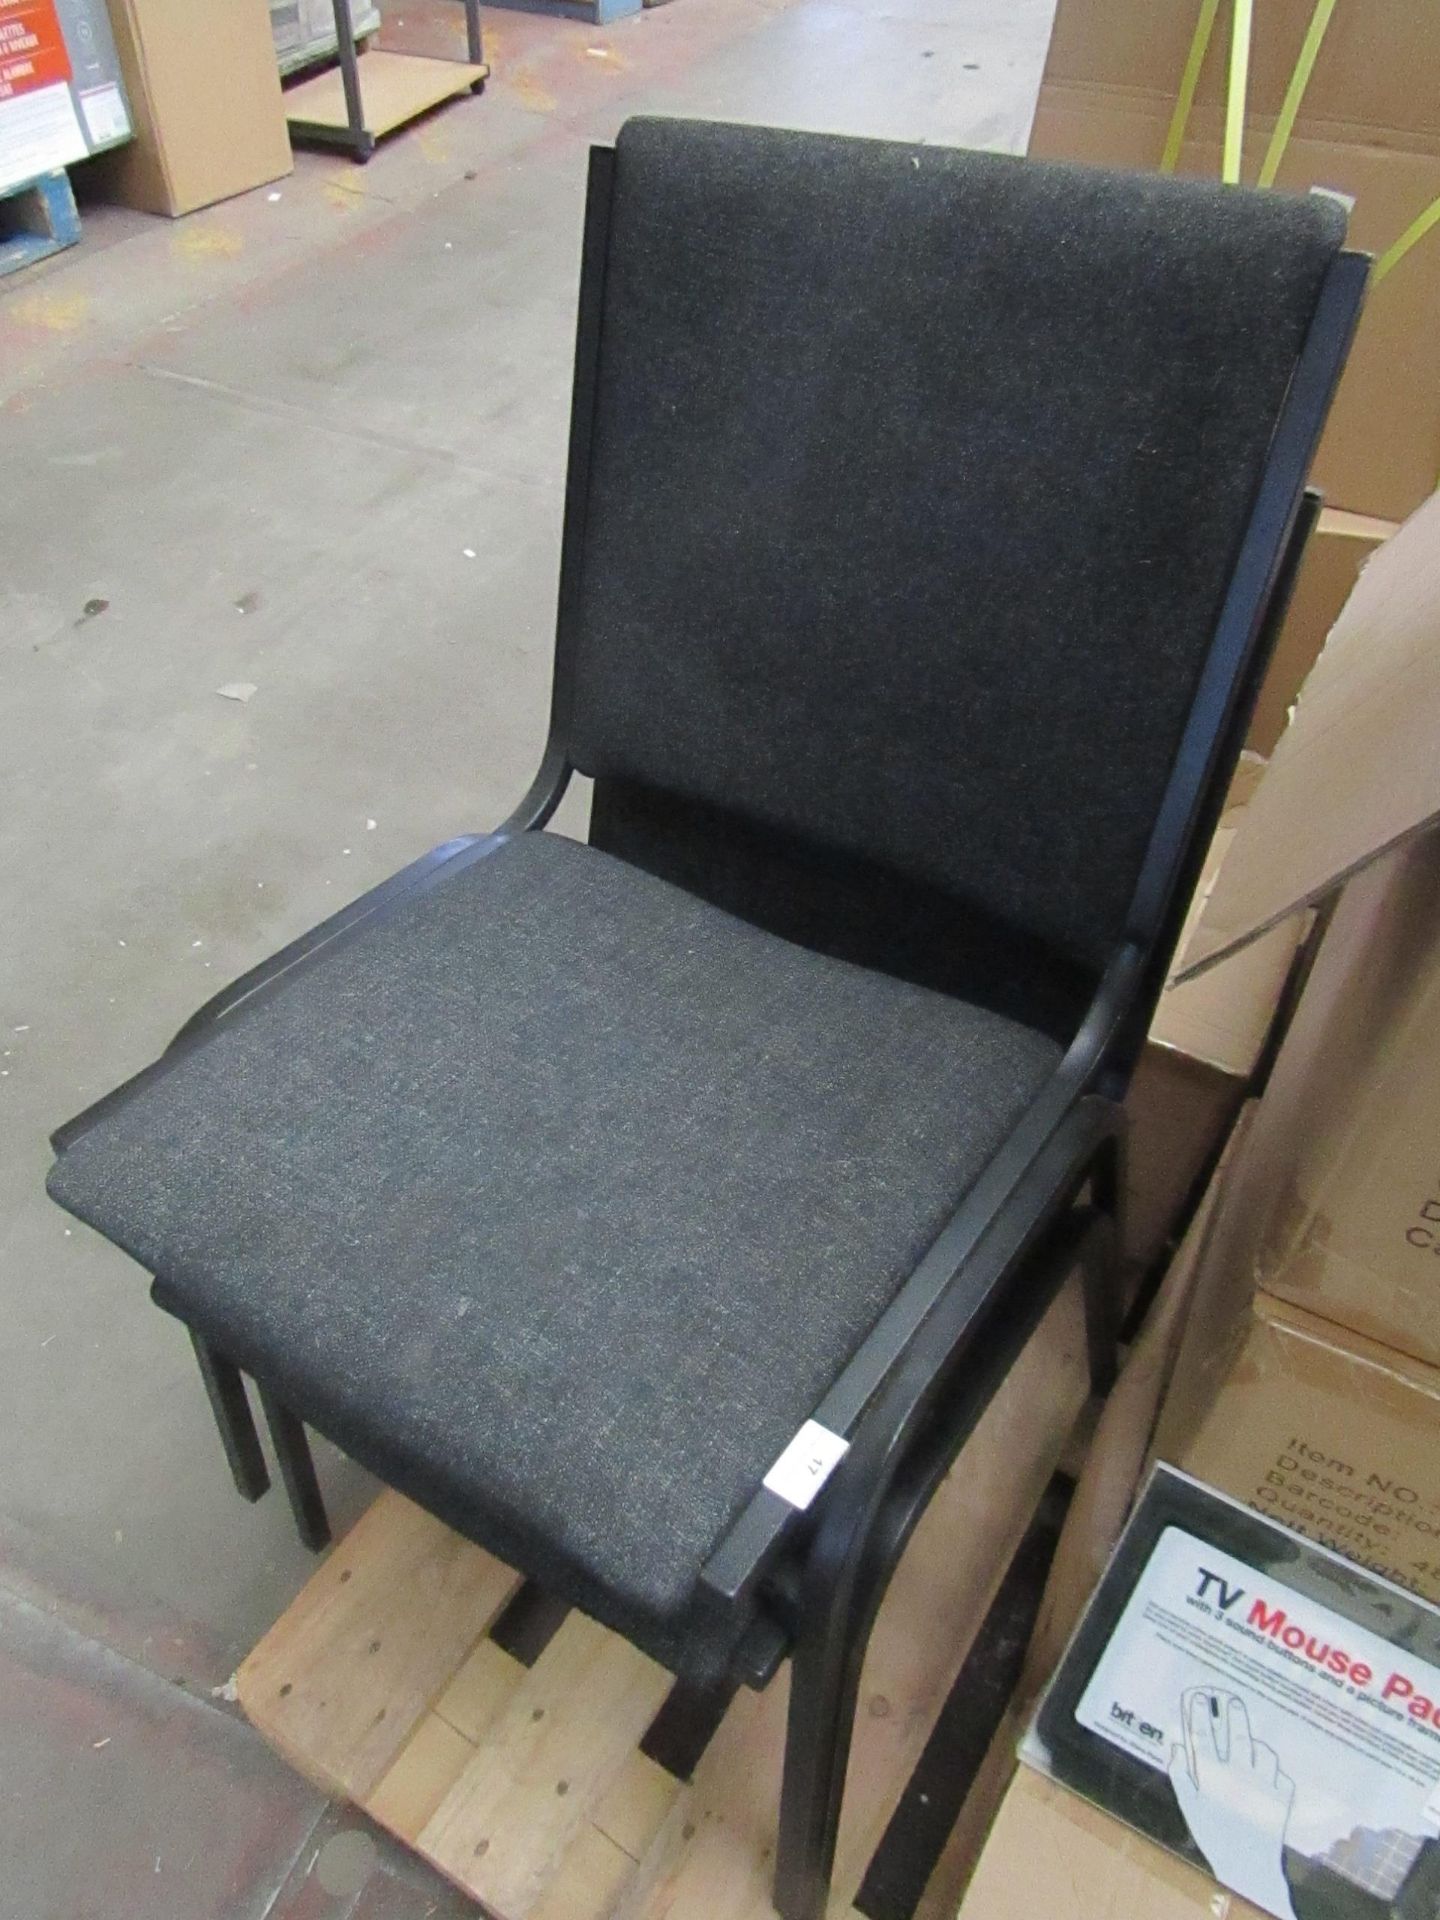 2x Black Steel Chairs - Used Condition.